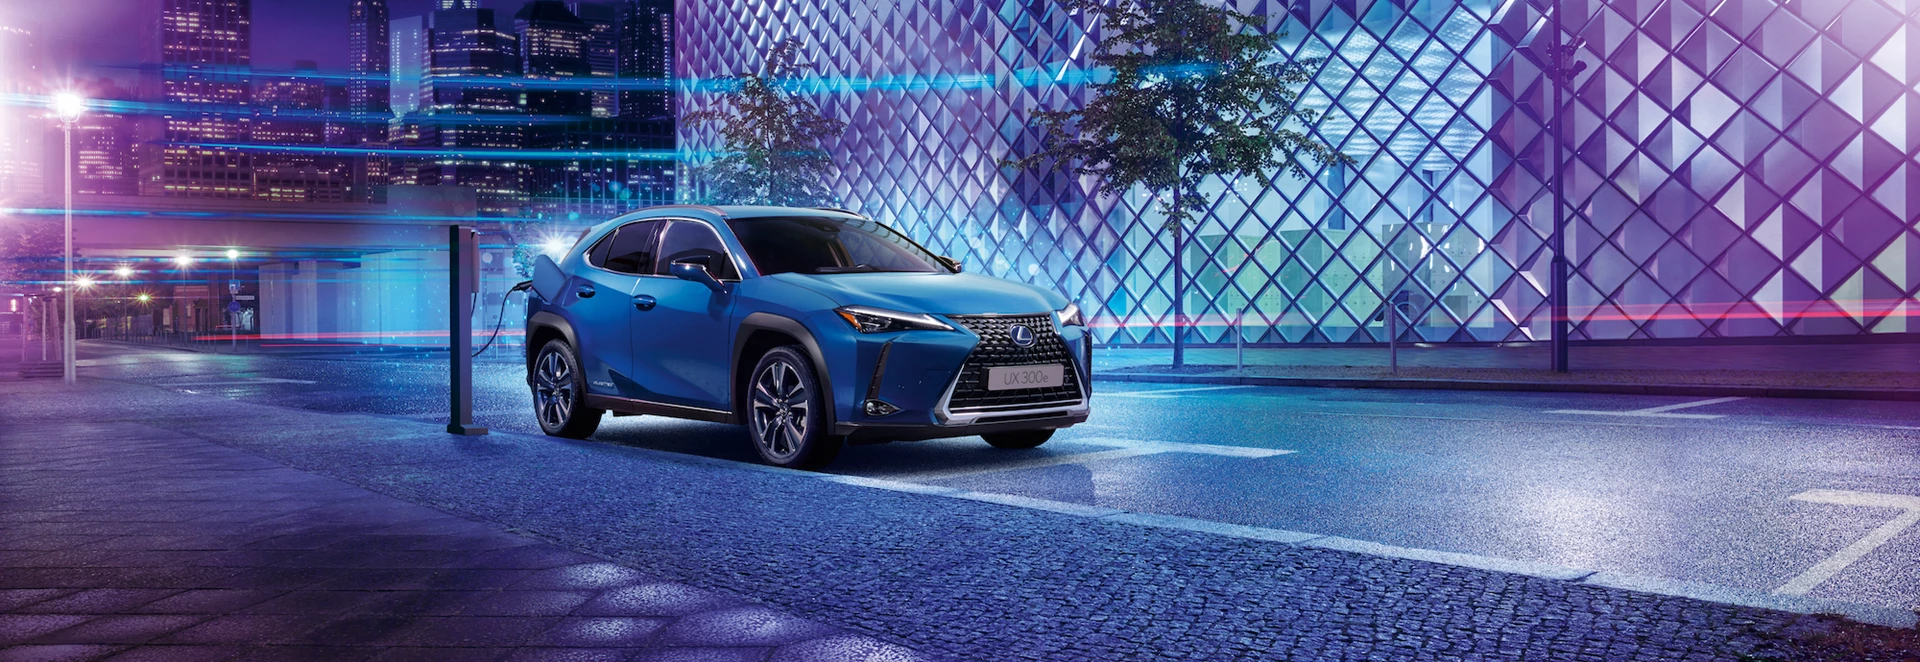 Lexus unveils first all-electric car – the UX300e